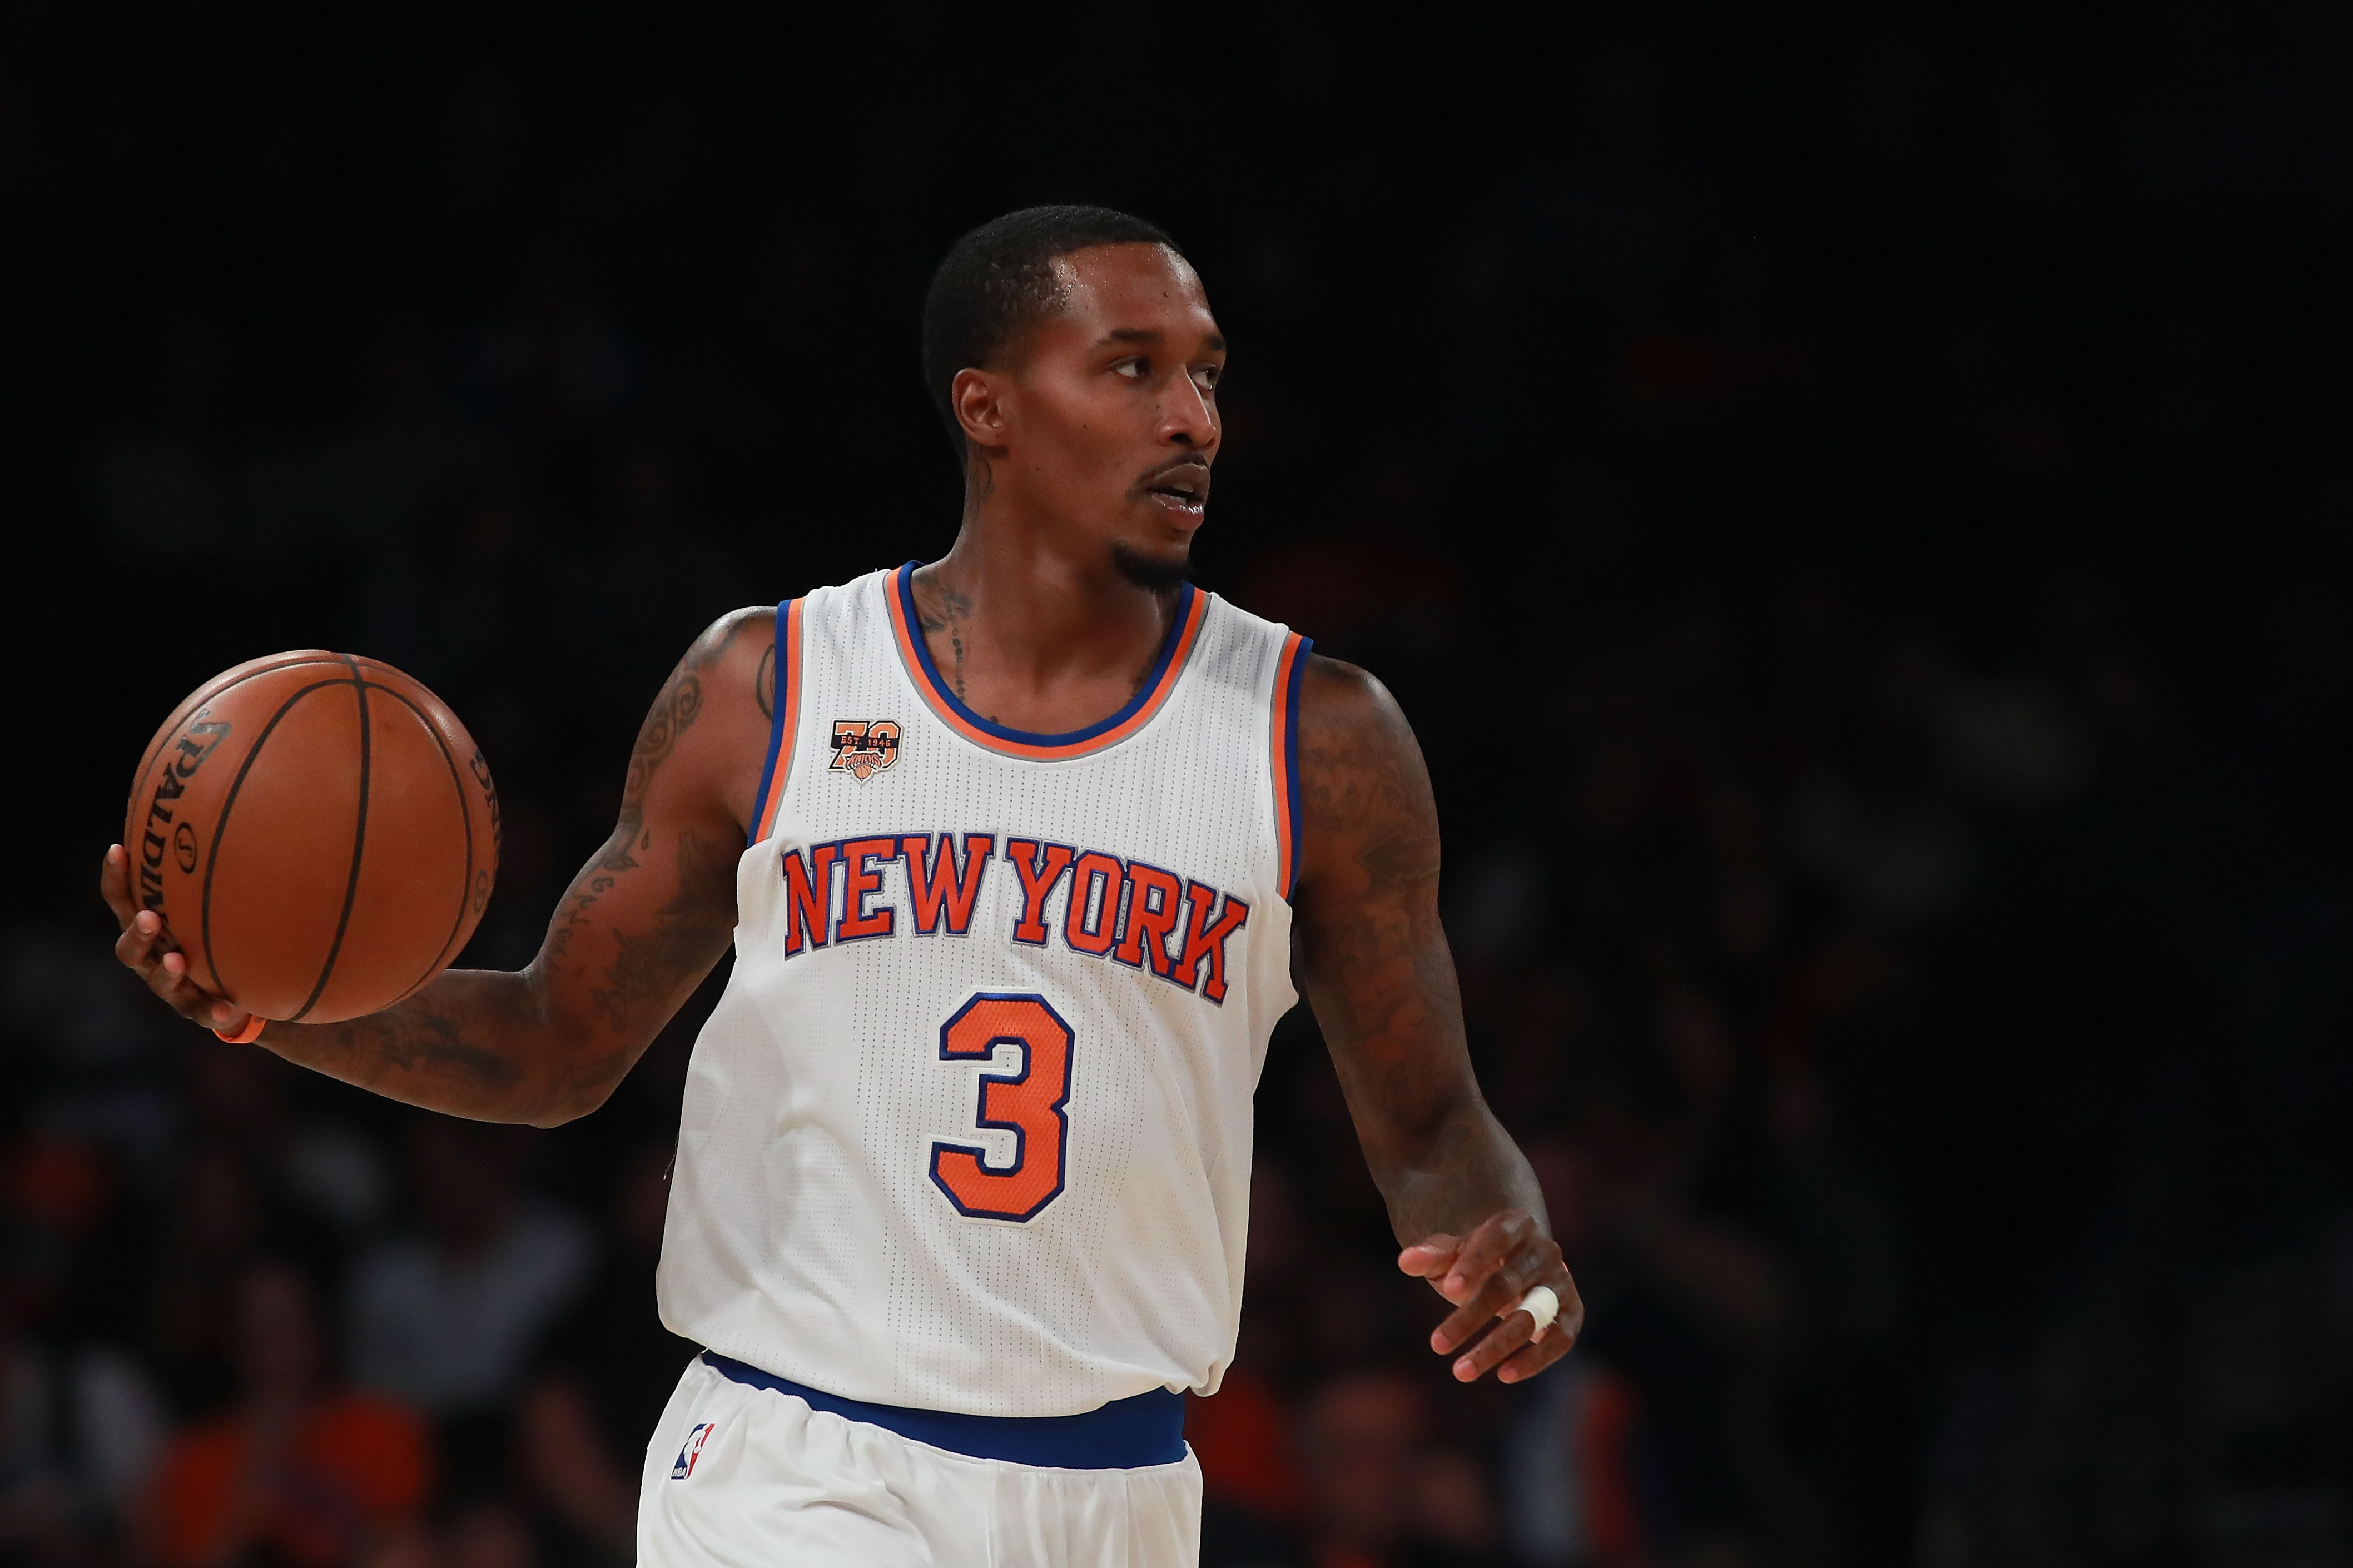 NEW YORK, NY - OCTOBER 15: Brandon Jennings #3 of the New York Knicks in action against the Boston Celtics during the first half of their preseason game at Madison Square Garden on October 15, 2016 in New York City. NOTE TO USER: User expressly acknowledges and agrees that, by downloading and or using this photograph, User is consenting to the terms and conditions of the Getty Images License Agreement.   Michael Reaves/Getty Images/AFP